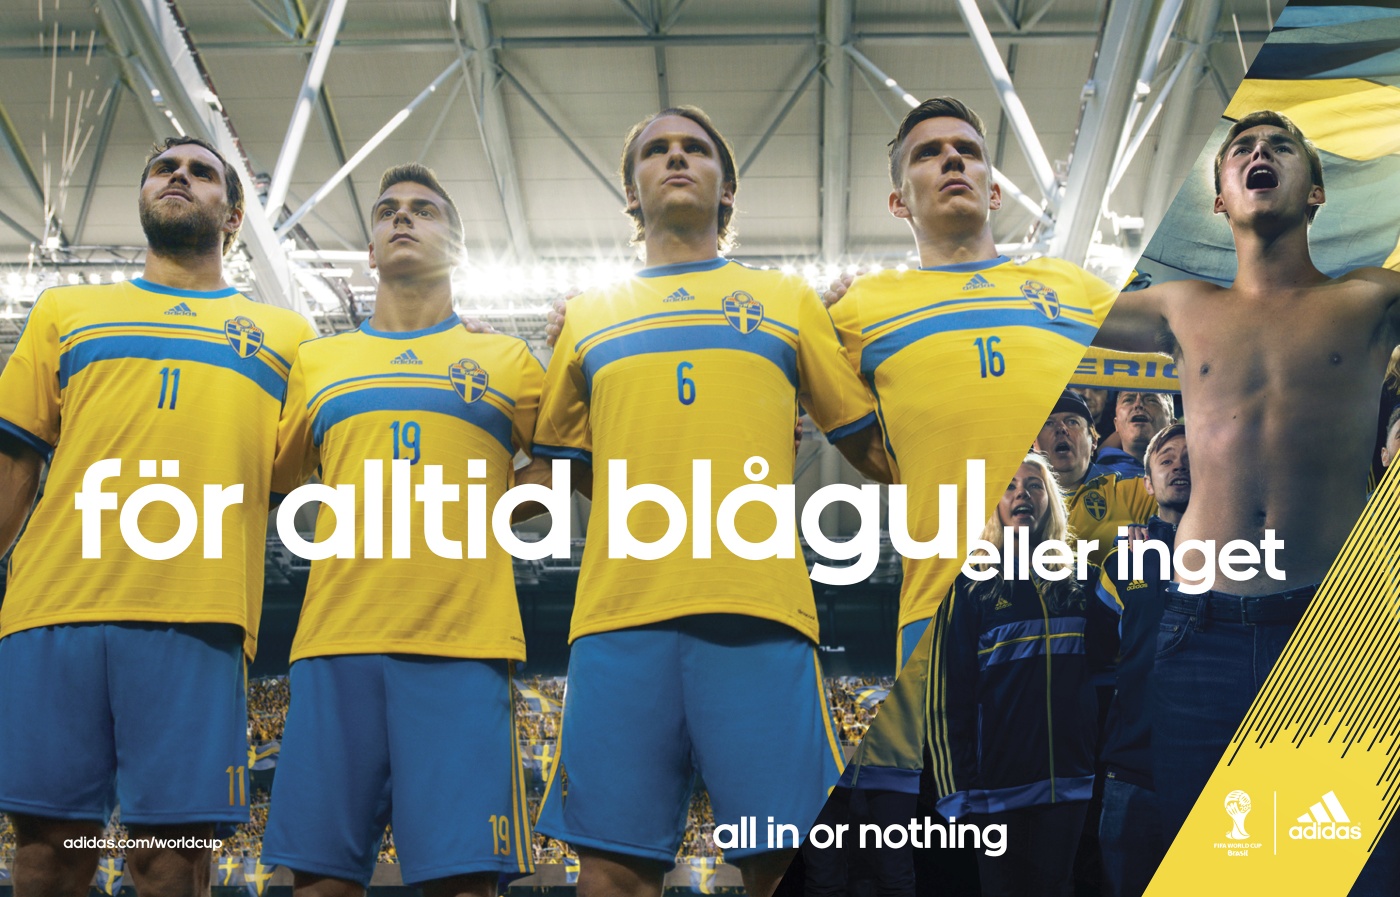 Dean Sills as a Swedish football fan - Commercial print for Adidas in Sweden